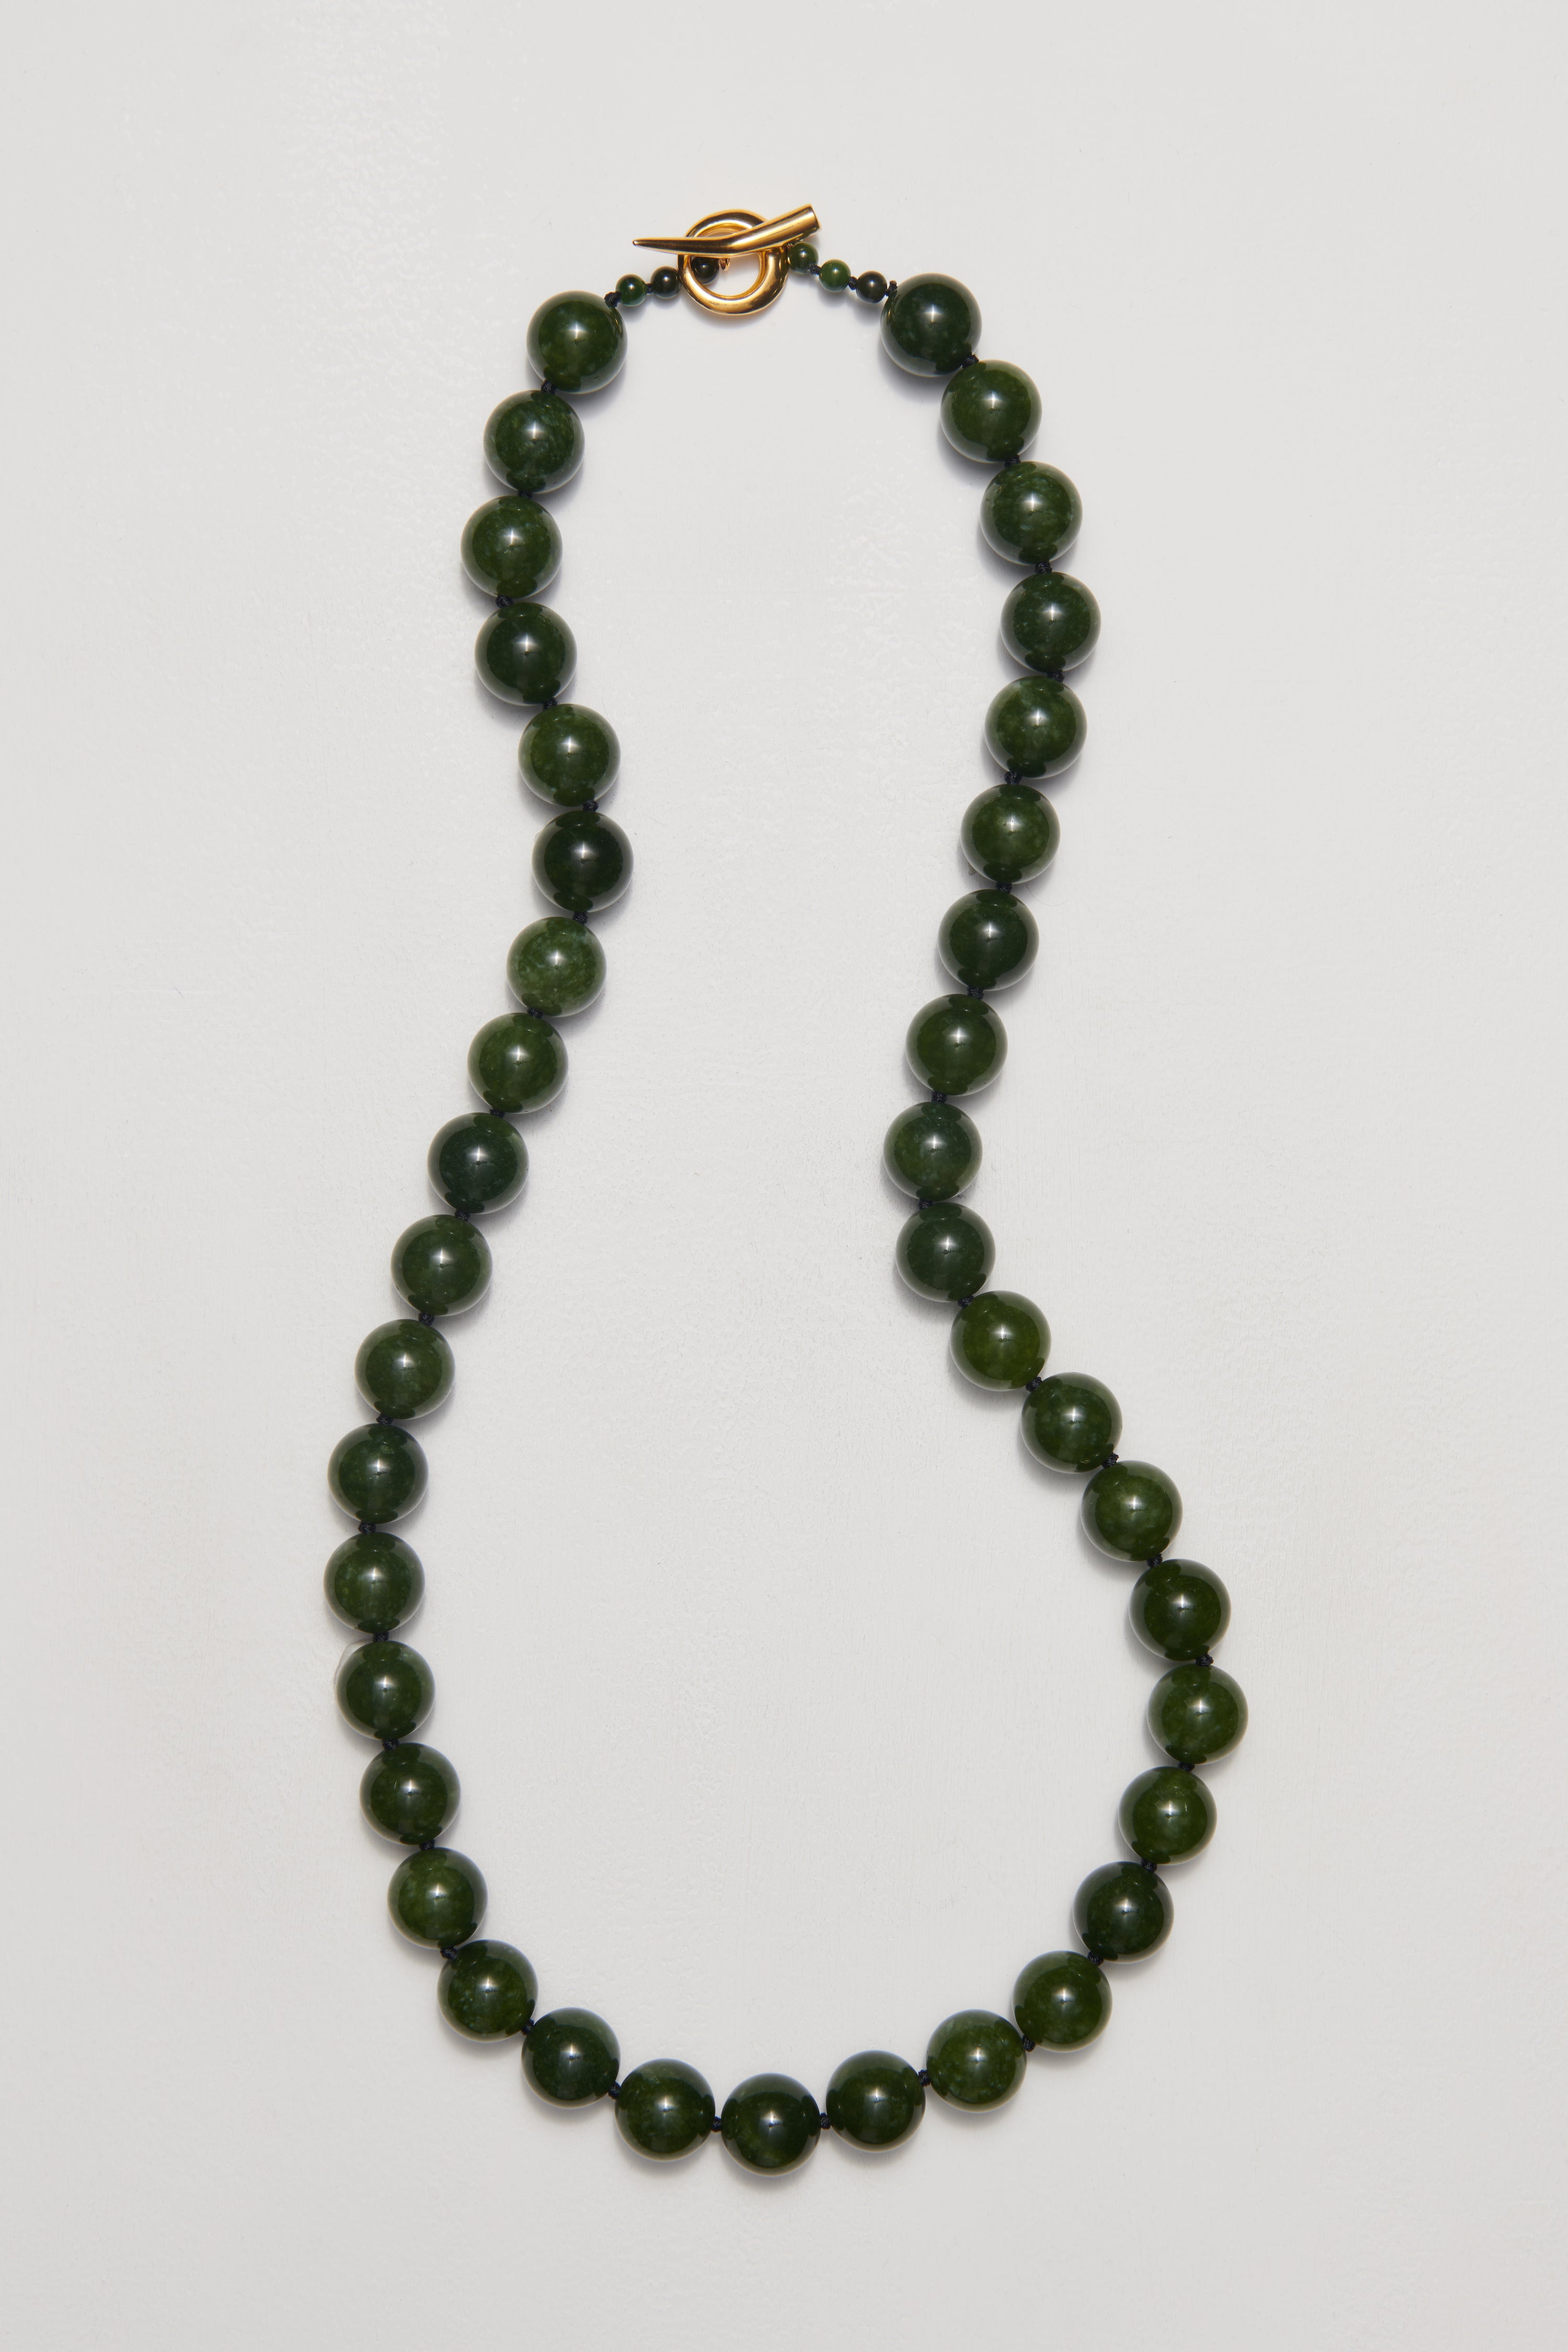 LONG JADE PERRIAND NECKLACE